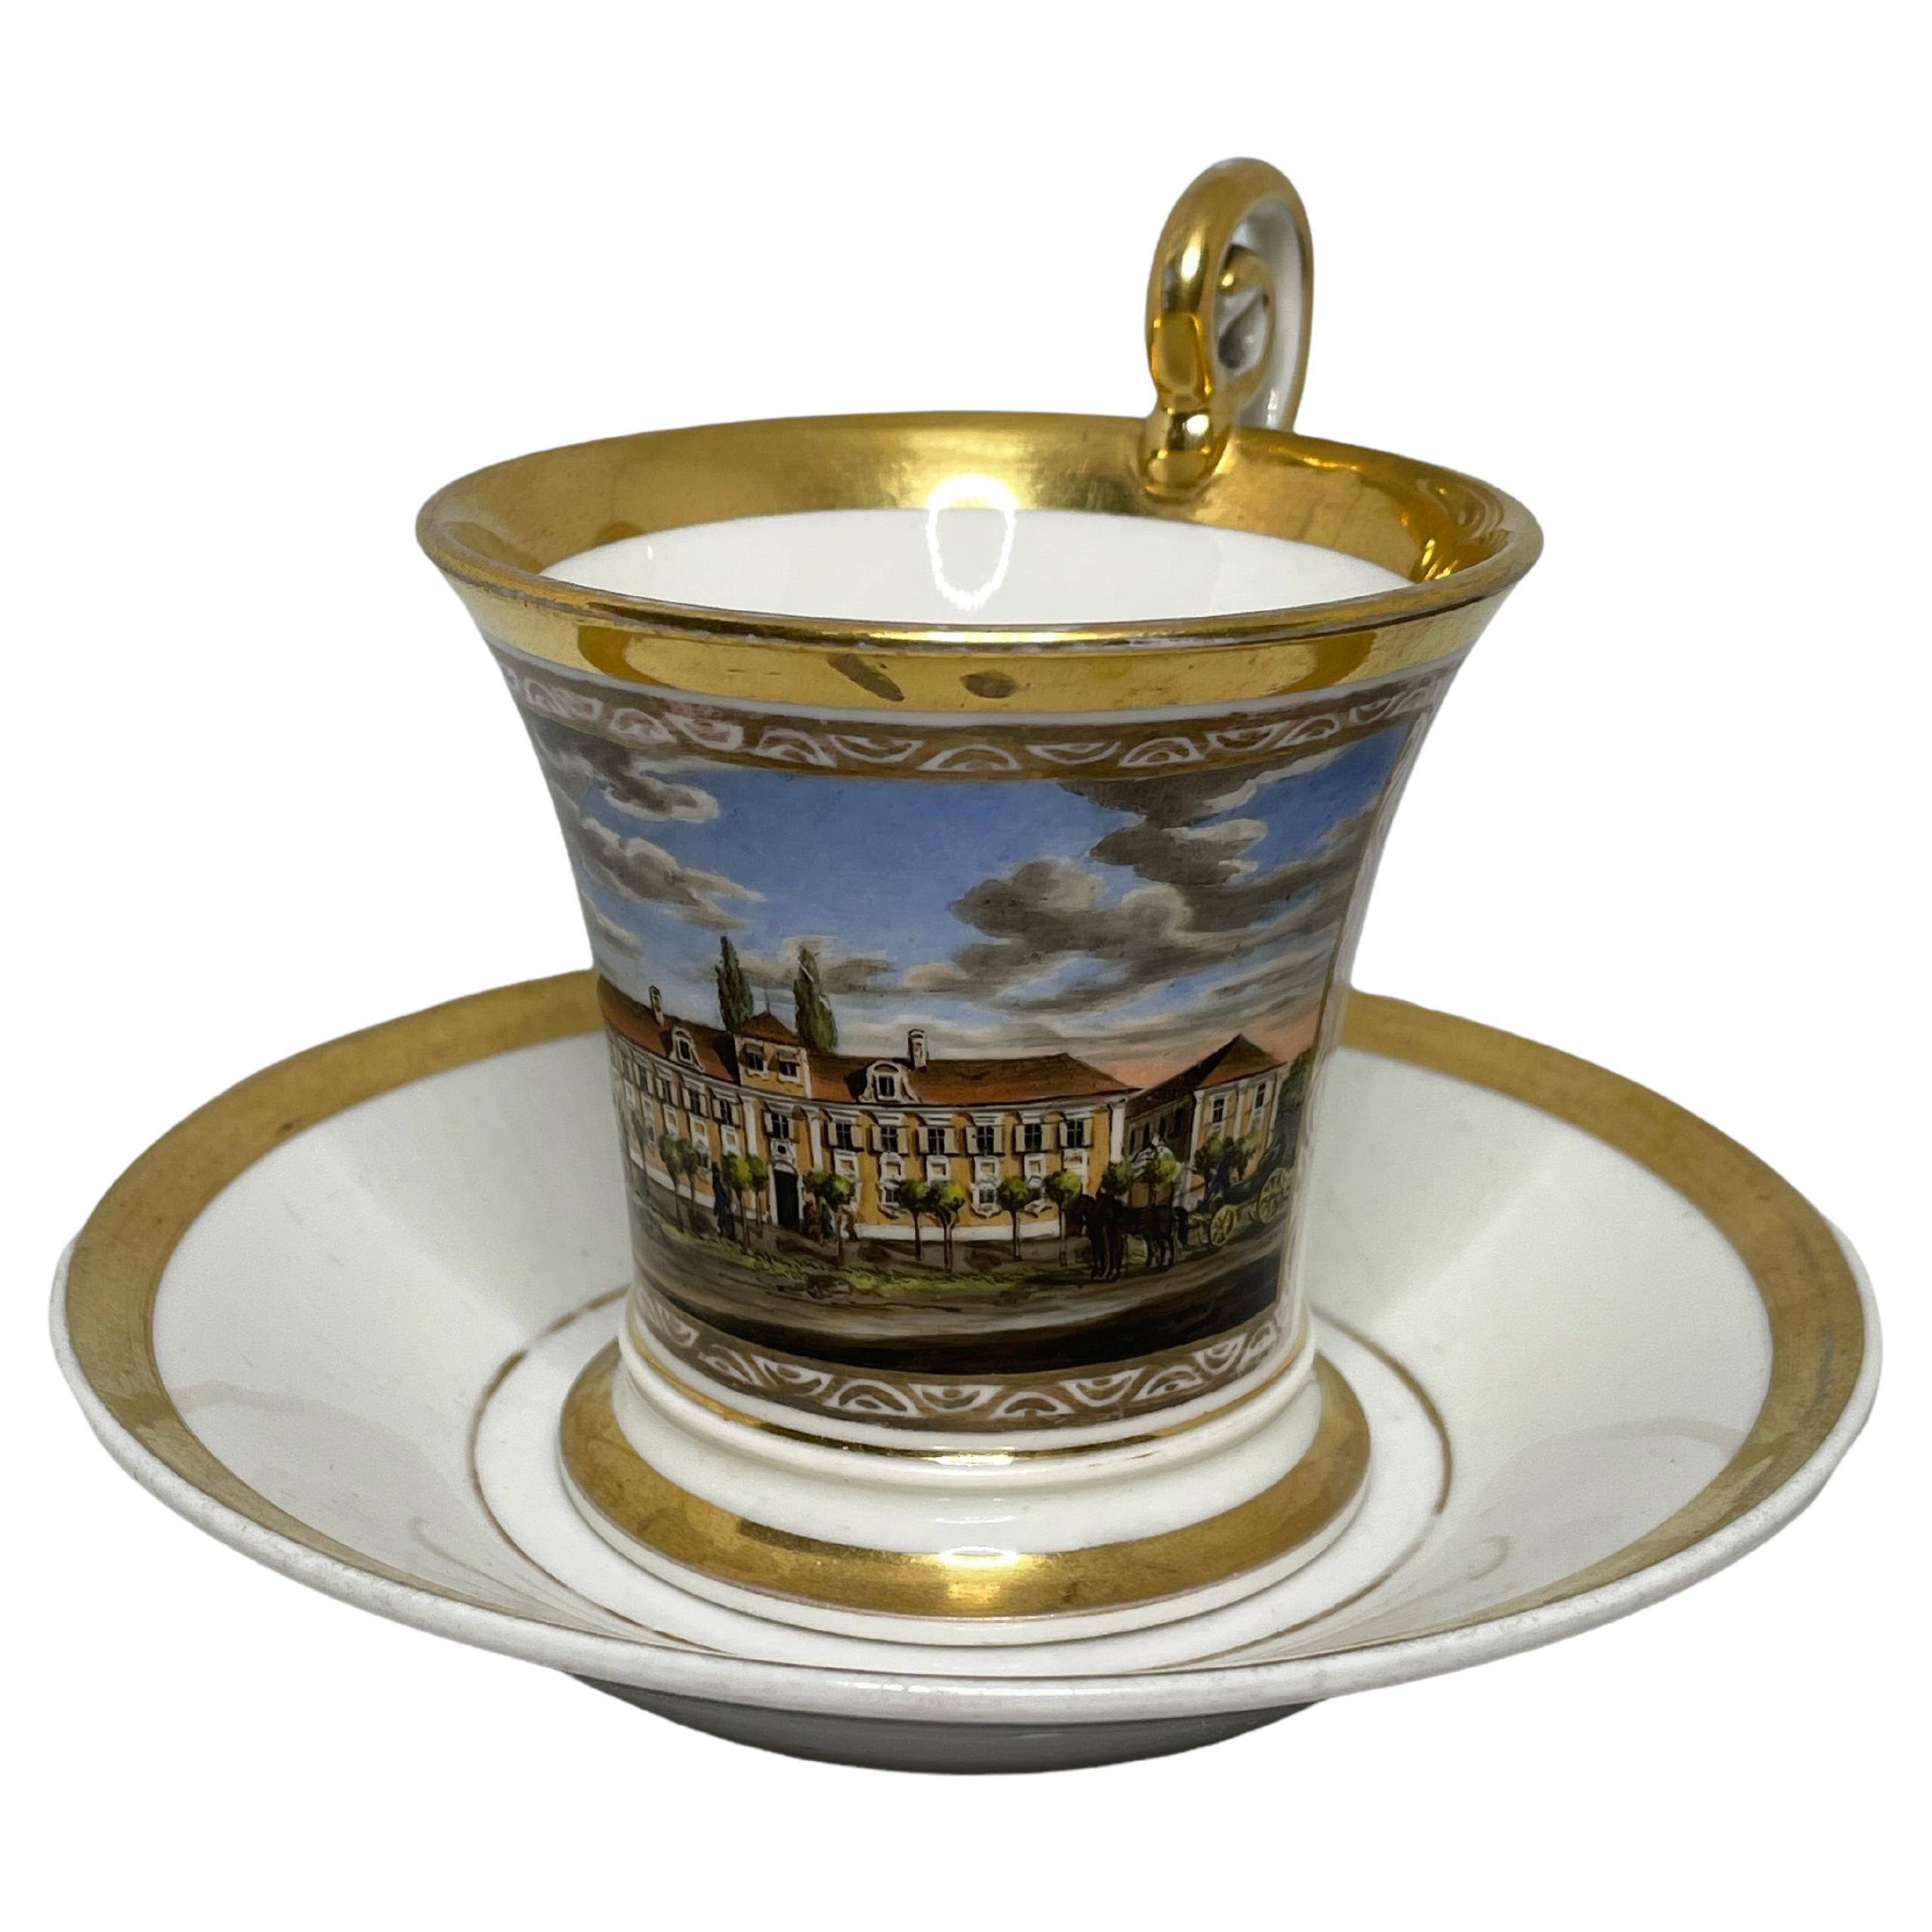 19th Century Biedermeier Period Topographical Porcelain Cup and Saucer